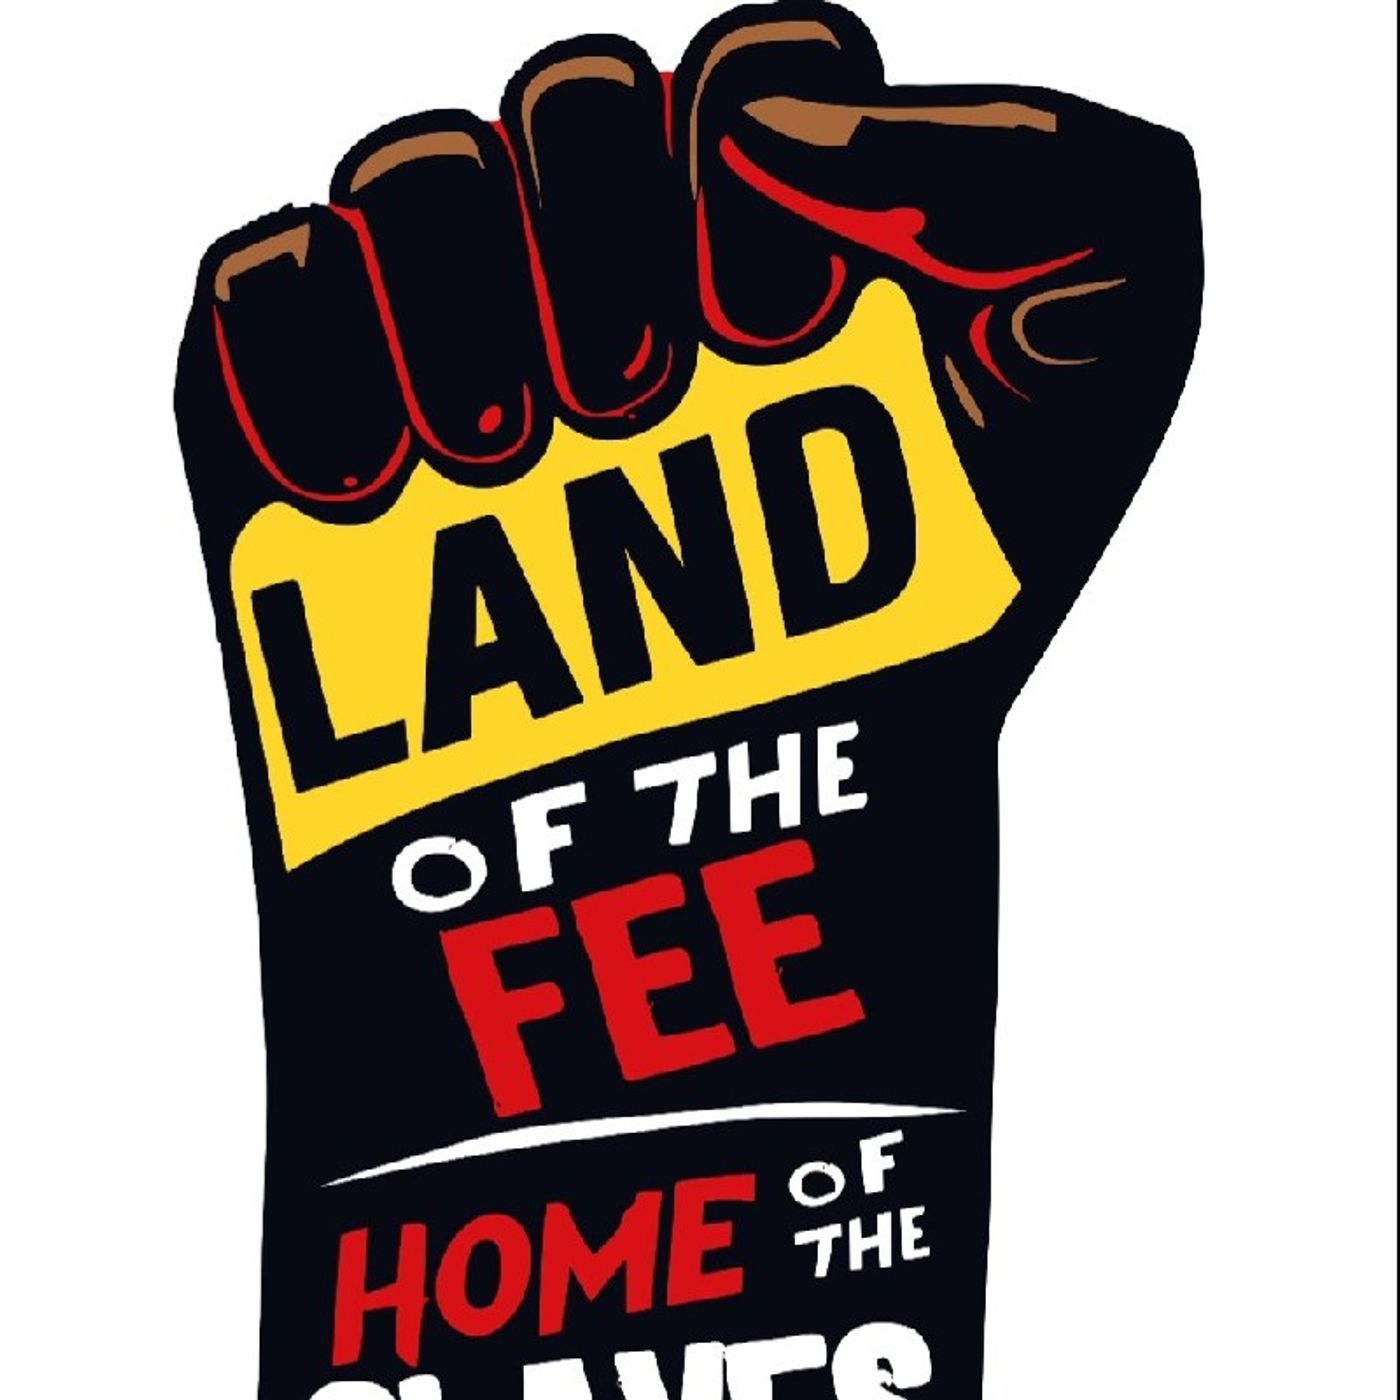 Episode 43 - The Land of The Fee And The Home Of The Slave